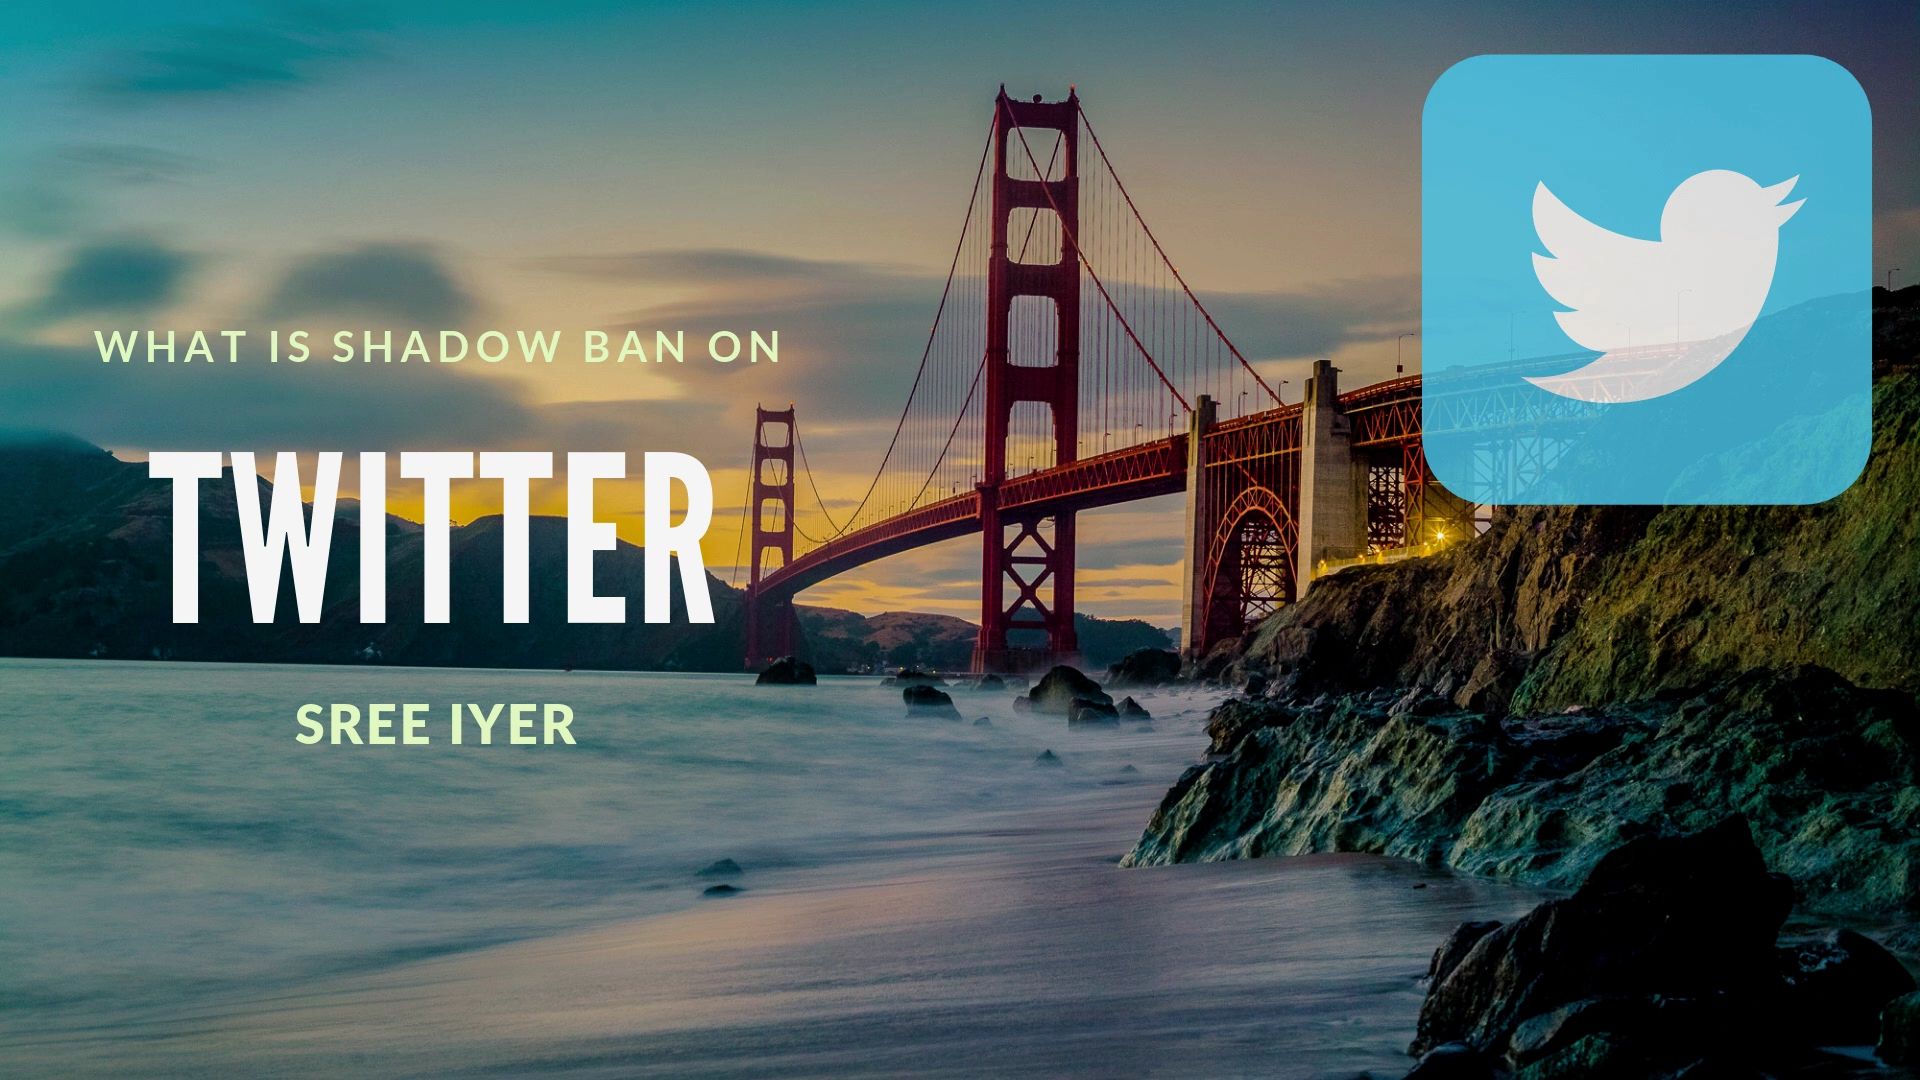 Sree Iyer tries to unravel the mysteries of the new Twitter algo and what Shadow Ban is